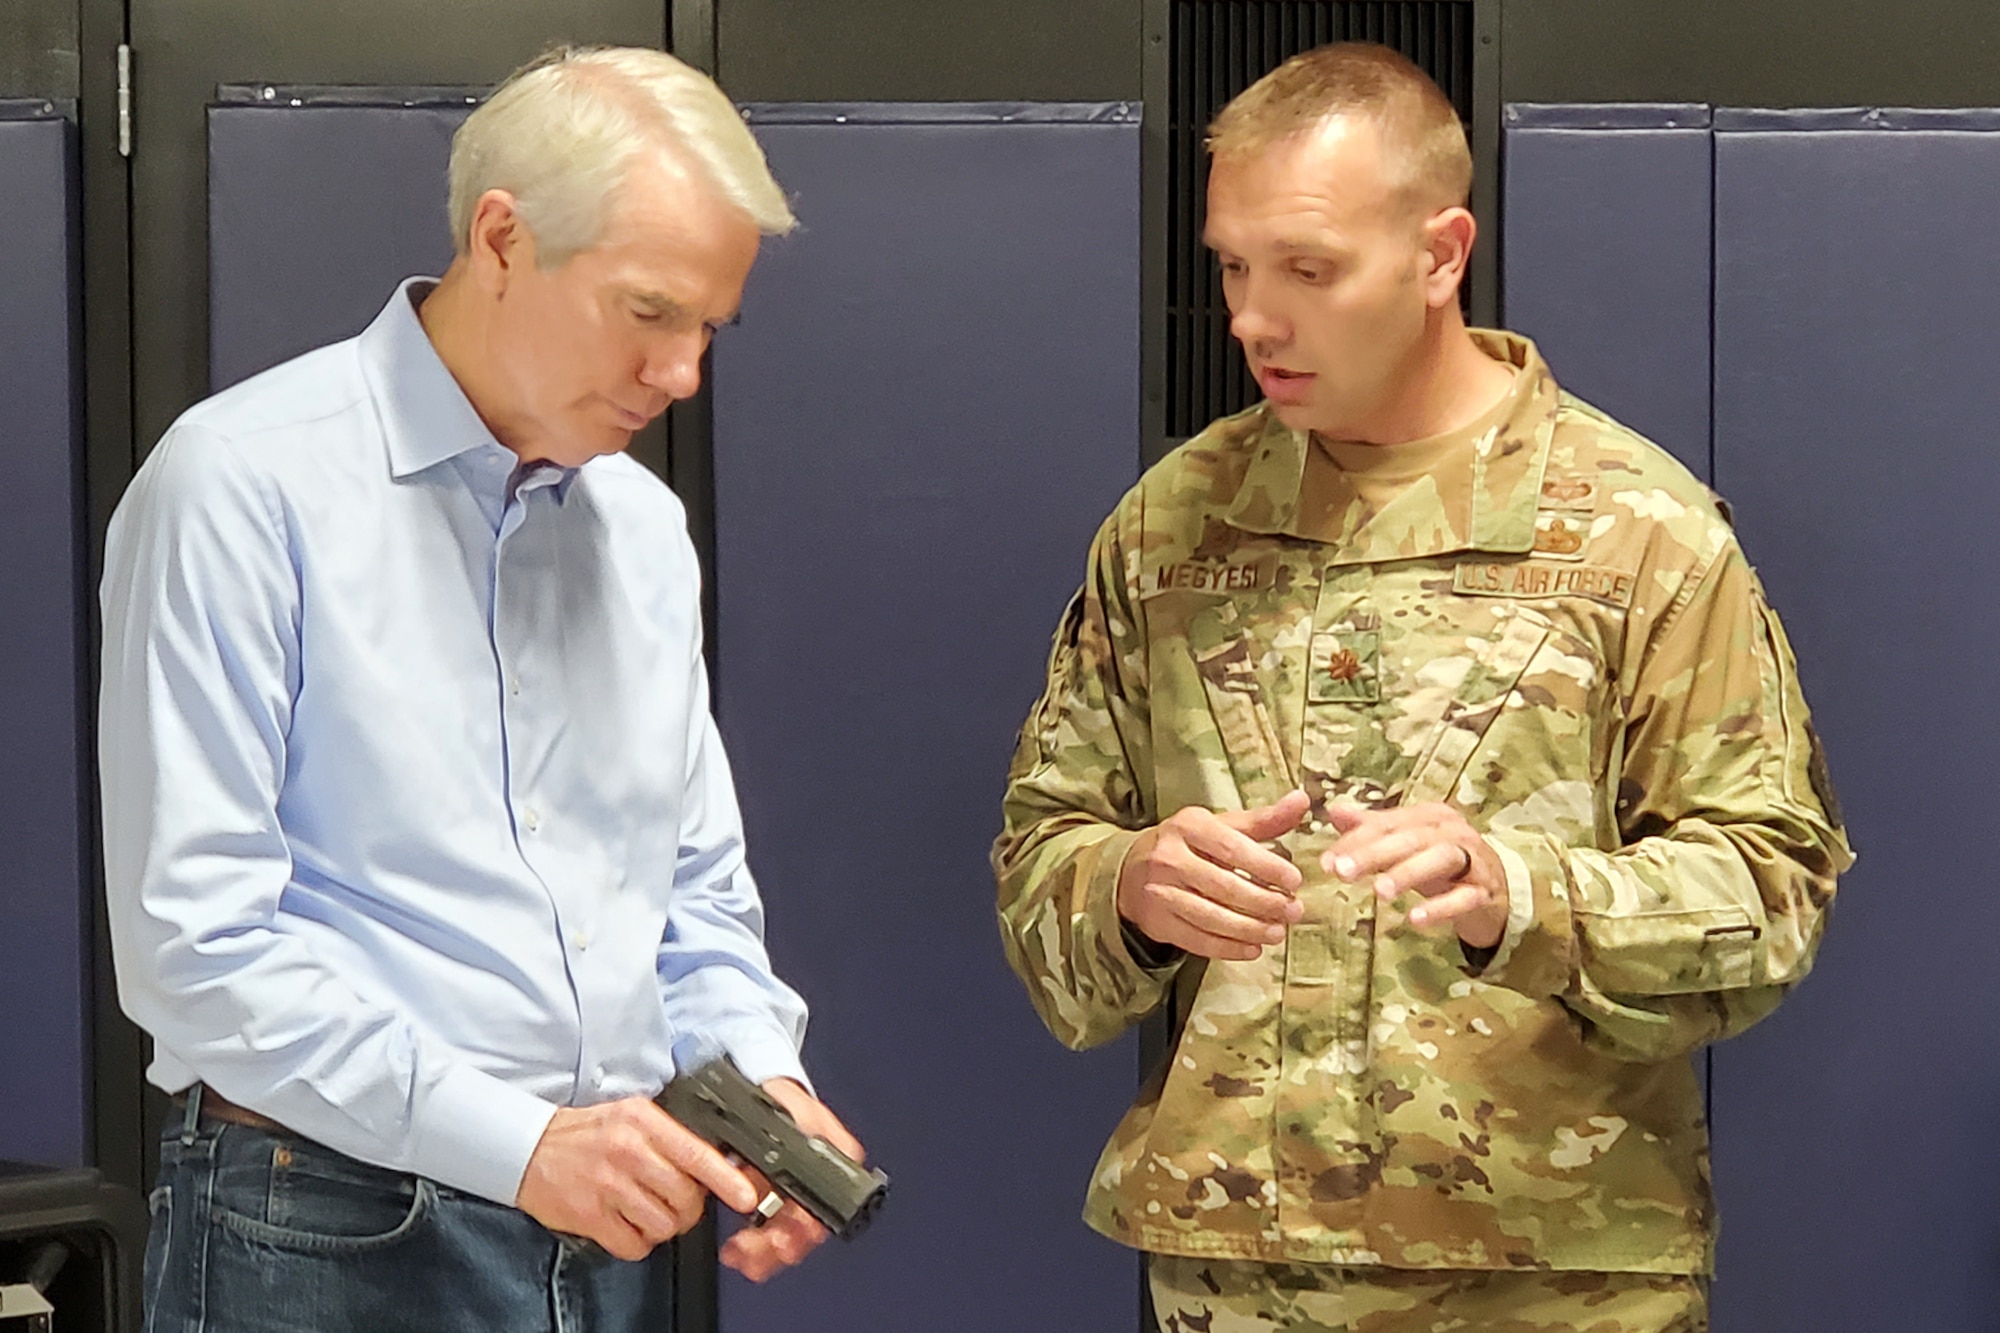 The Air Force Reserve’s 910th Airlift Wing welcomed Ohio U.S. Senator Rob Portman for a visit to Youngstown Air Reserve Station, Ohio, June 29, 2021.